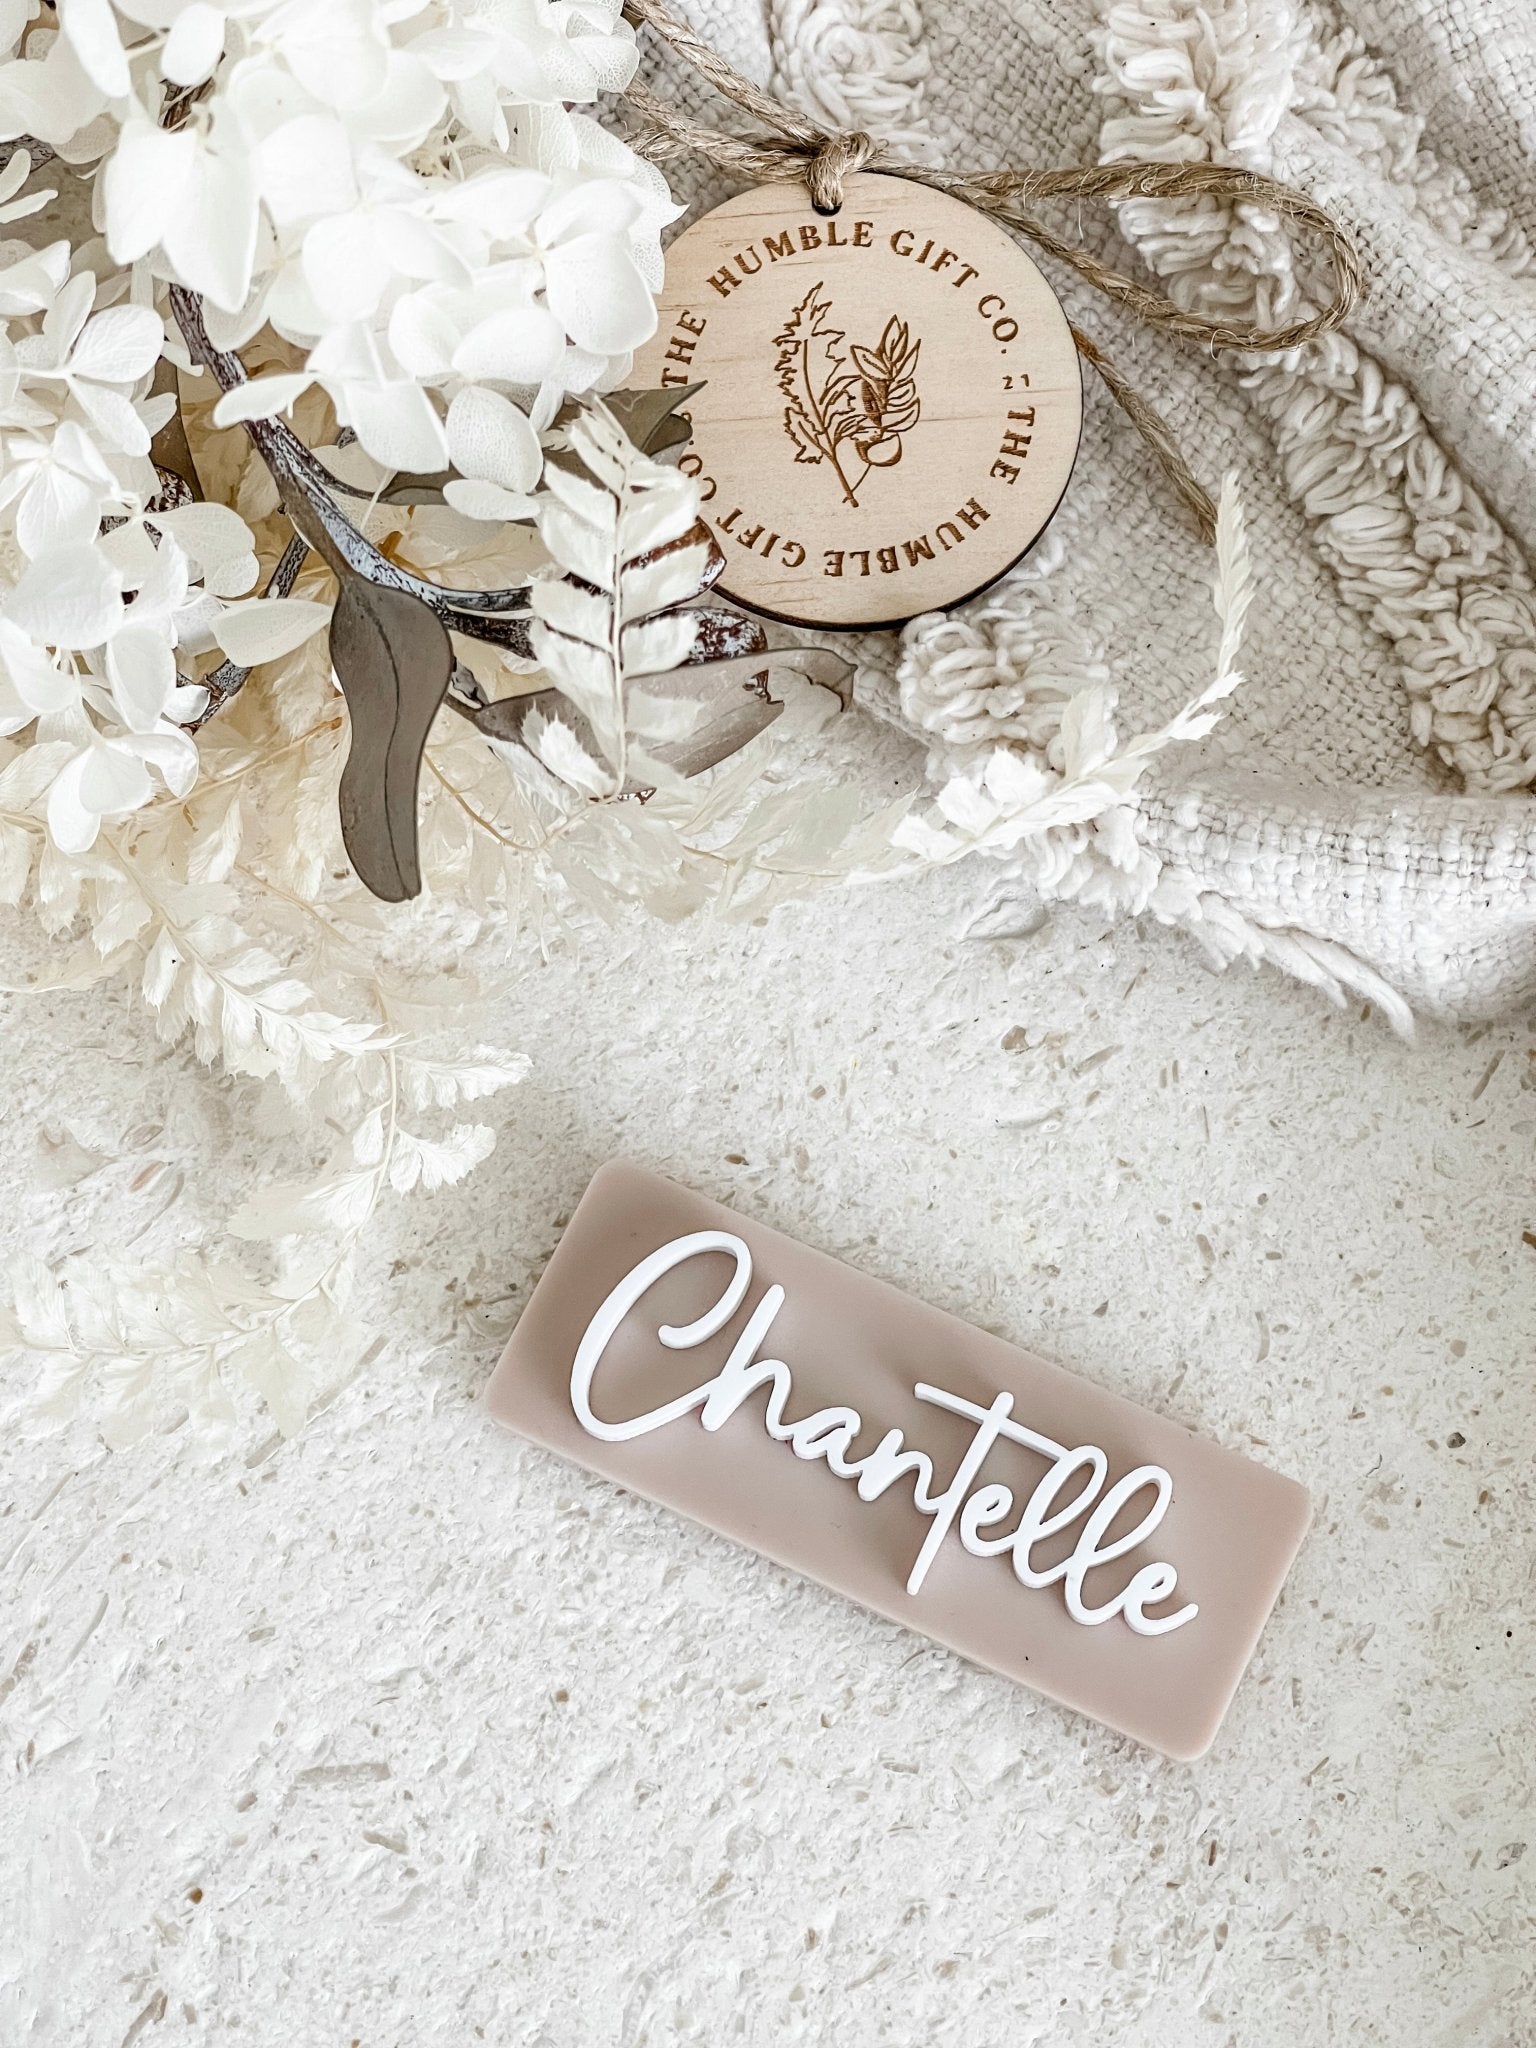 Name Badge with Script Font - The Humble Gift Co.